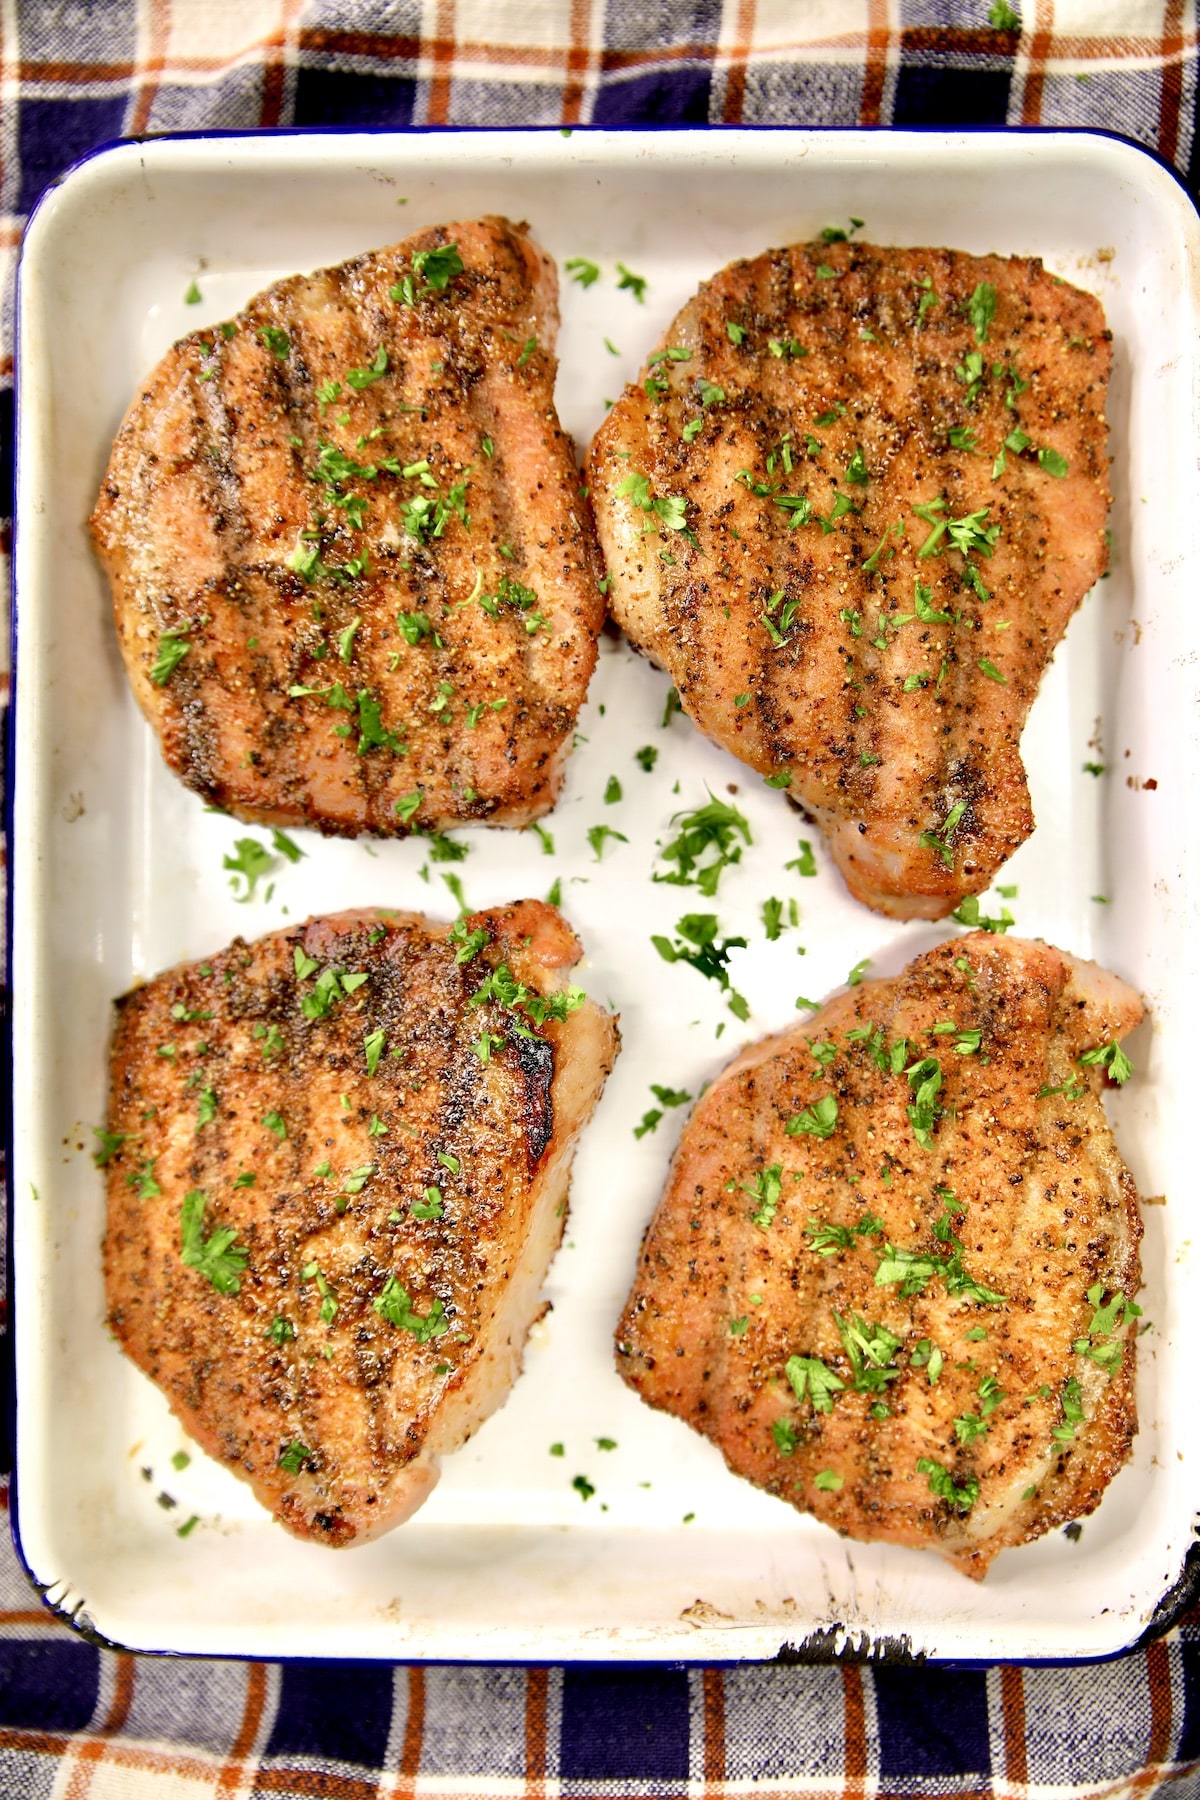 4 grilled pork chops on a white tray.